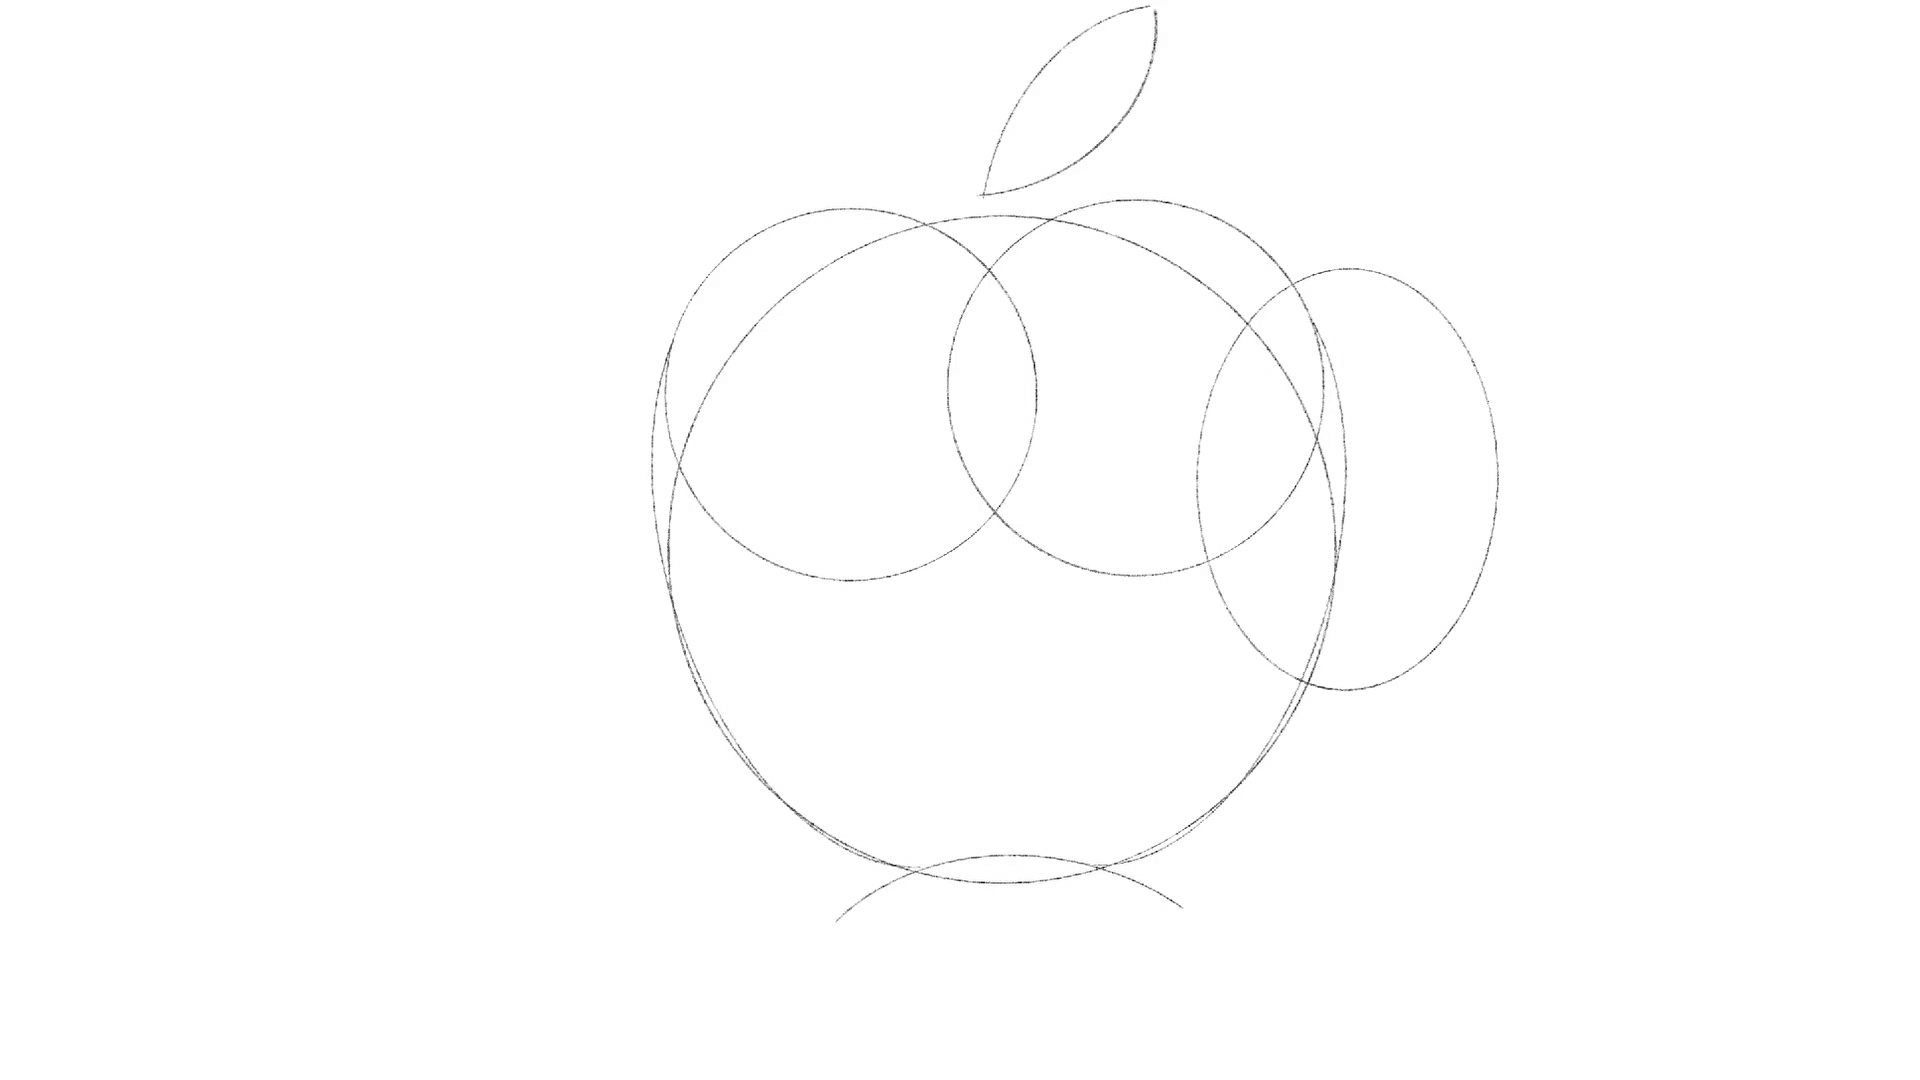 Step 4 of drawing the Apple logo: Draw the bite and stem of the apple